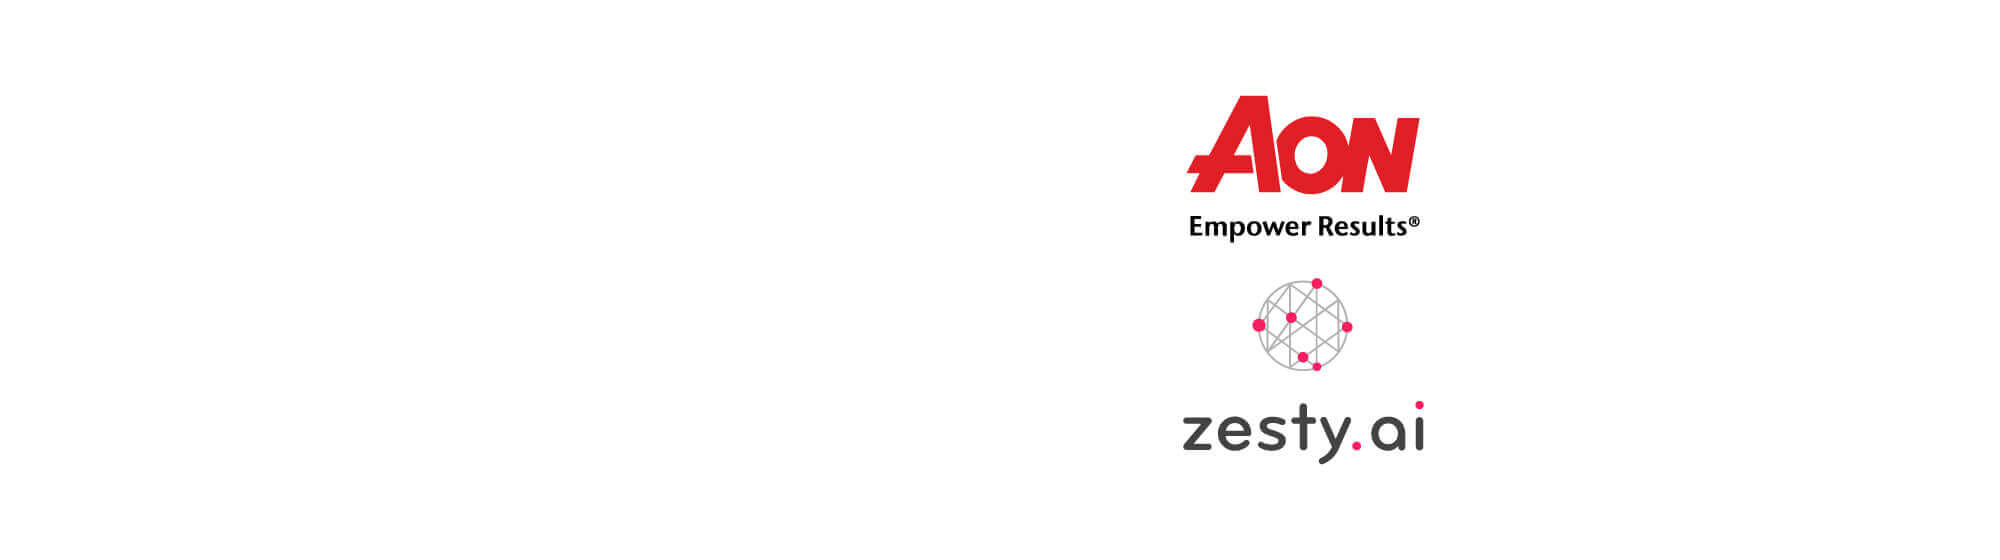 Aon and Zesty<sup>AI</sup> Revolutionize Underwriting with Property Data Solution Powered by Artificial Intelligence